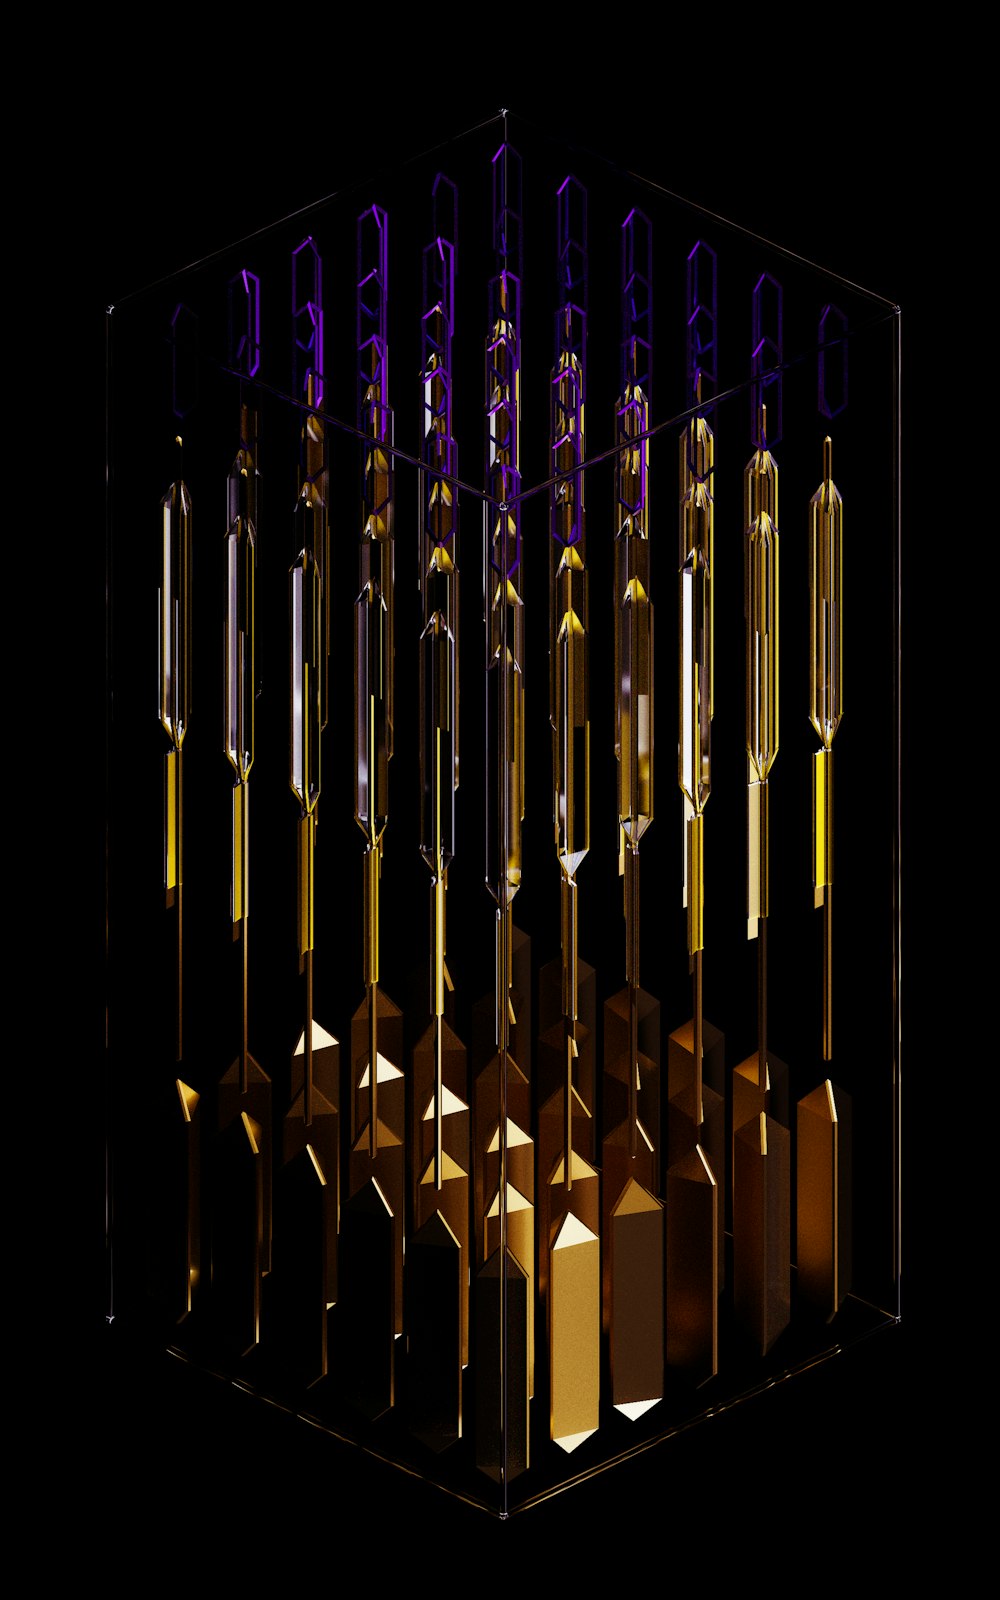 a black background with gold and purple geometric shapes